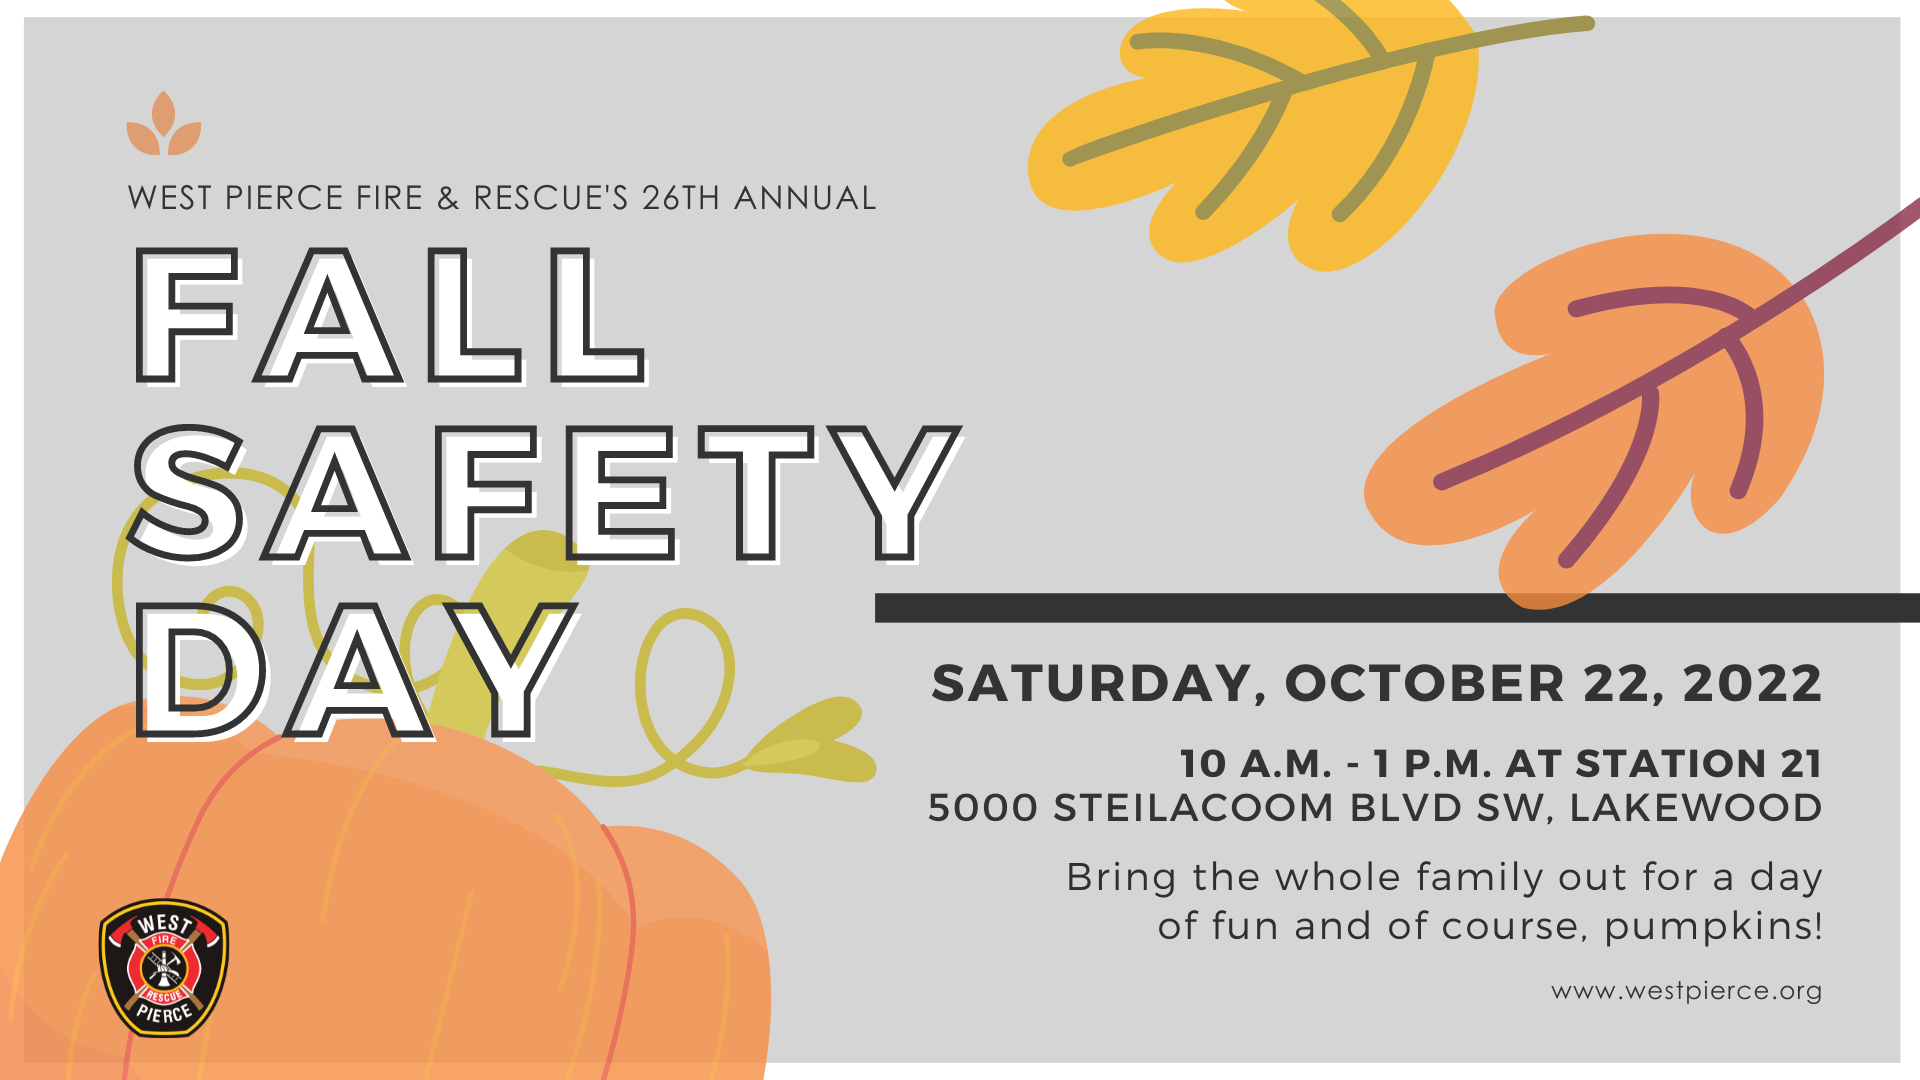 fall safety day event will be held on saturday, october 22nd from 10am to 1pm at 5000 steilacoom boulevard sw in lakewood